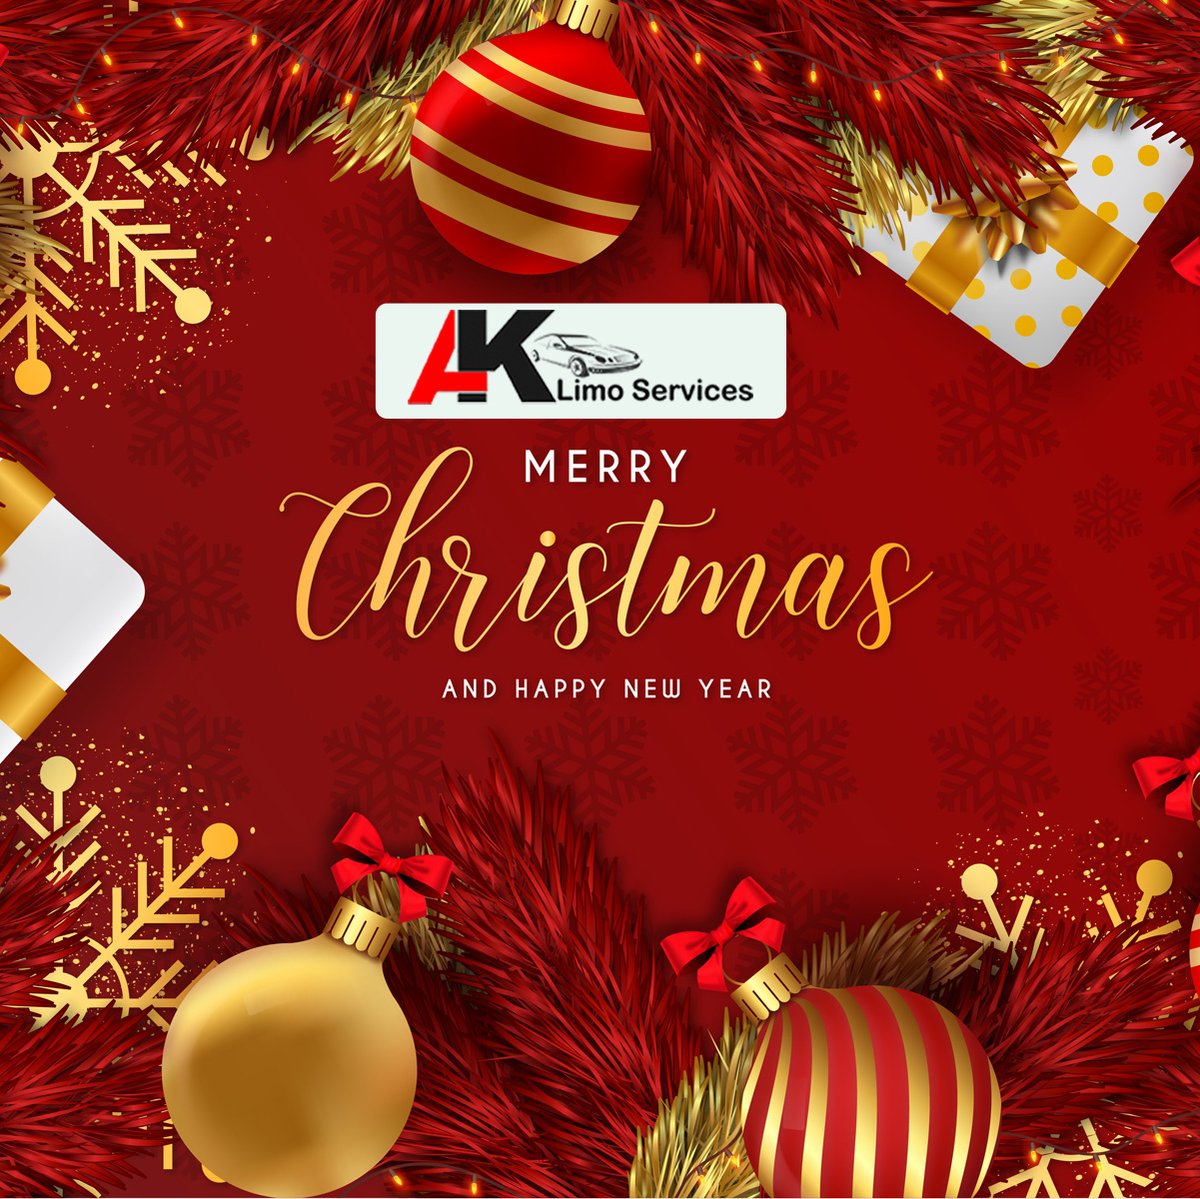 AK Limo Services team wishes you and your family a very Happy and Joyous Christmas season. Happy Holidays!

#happyholidays2020 #holidayseason #holidaystime #christmas #happyholidaysvibes #happyholidaysparty #holidayscelebration